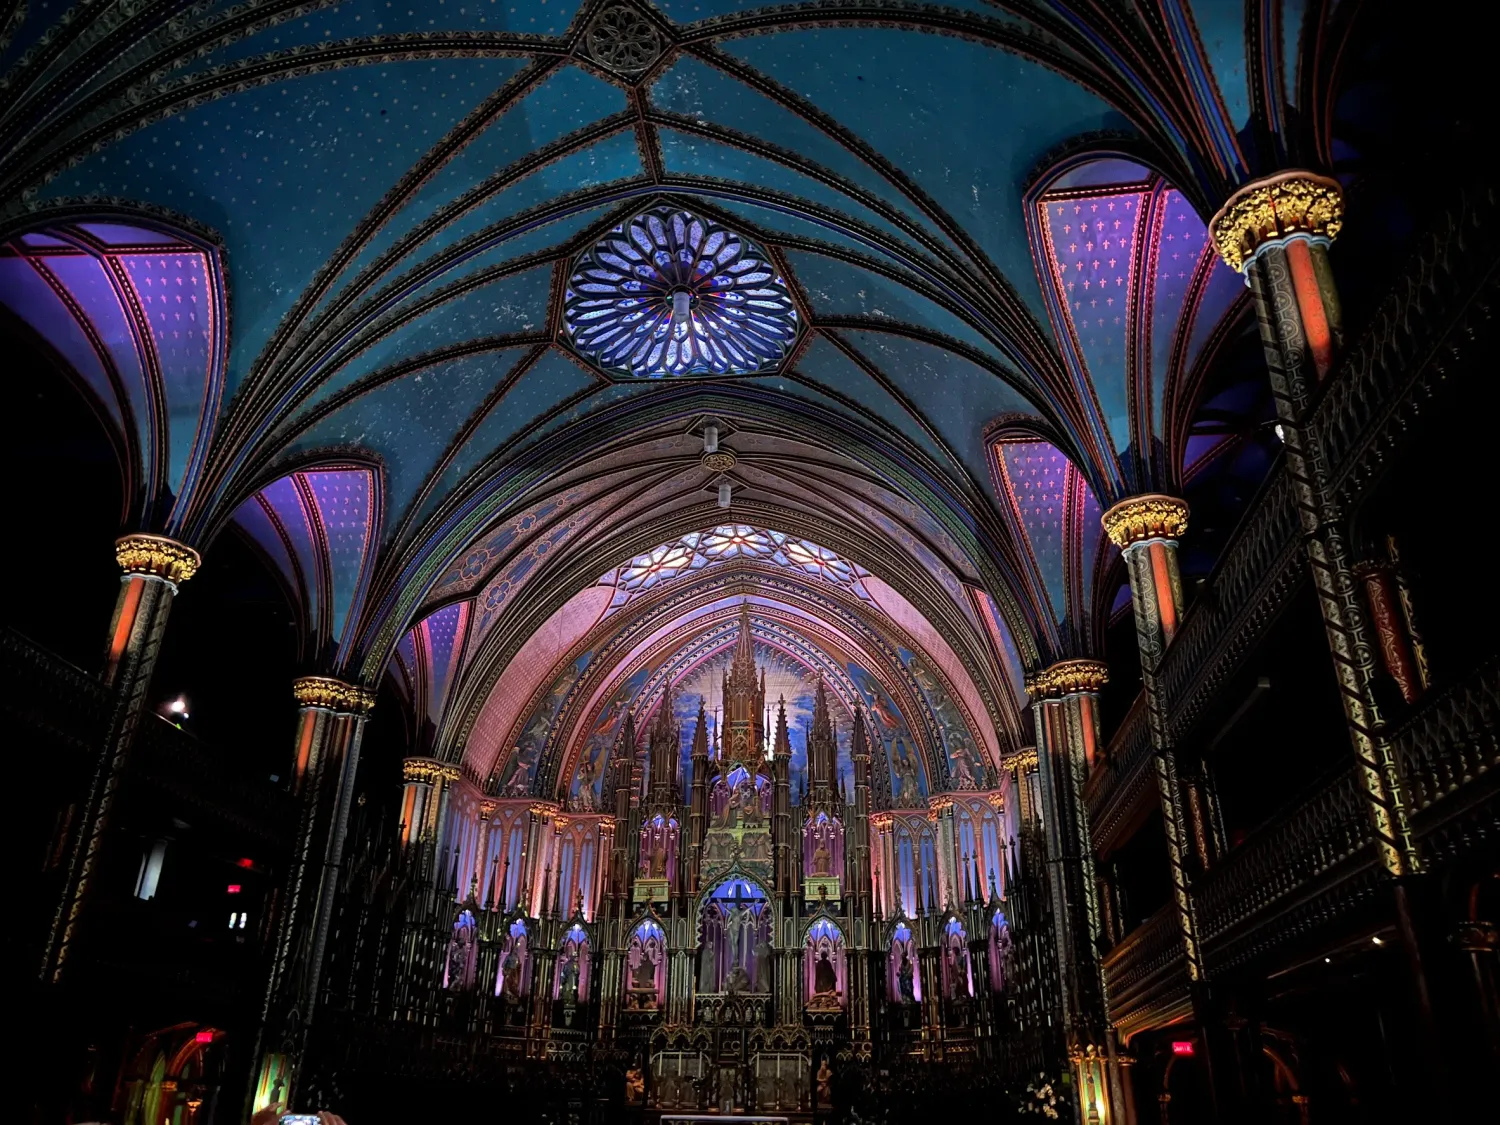 The inside of the Notre-Dame Basilica